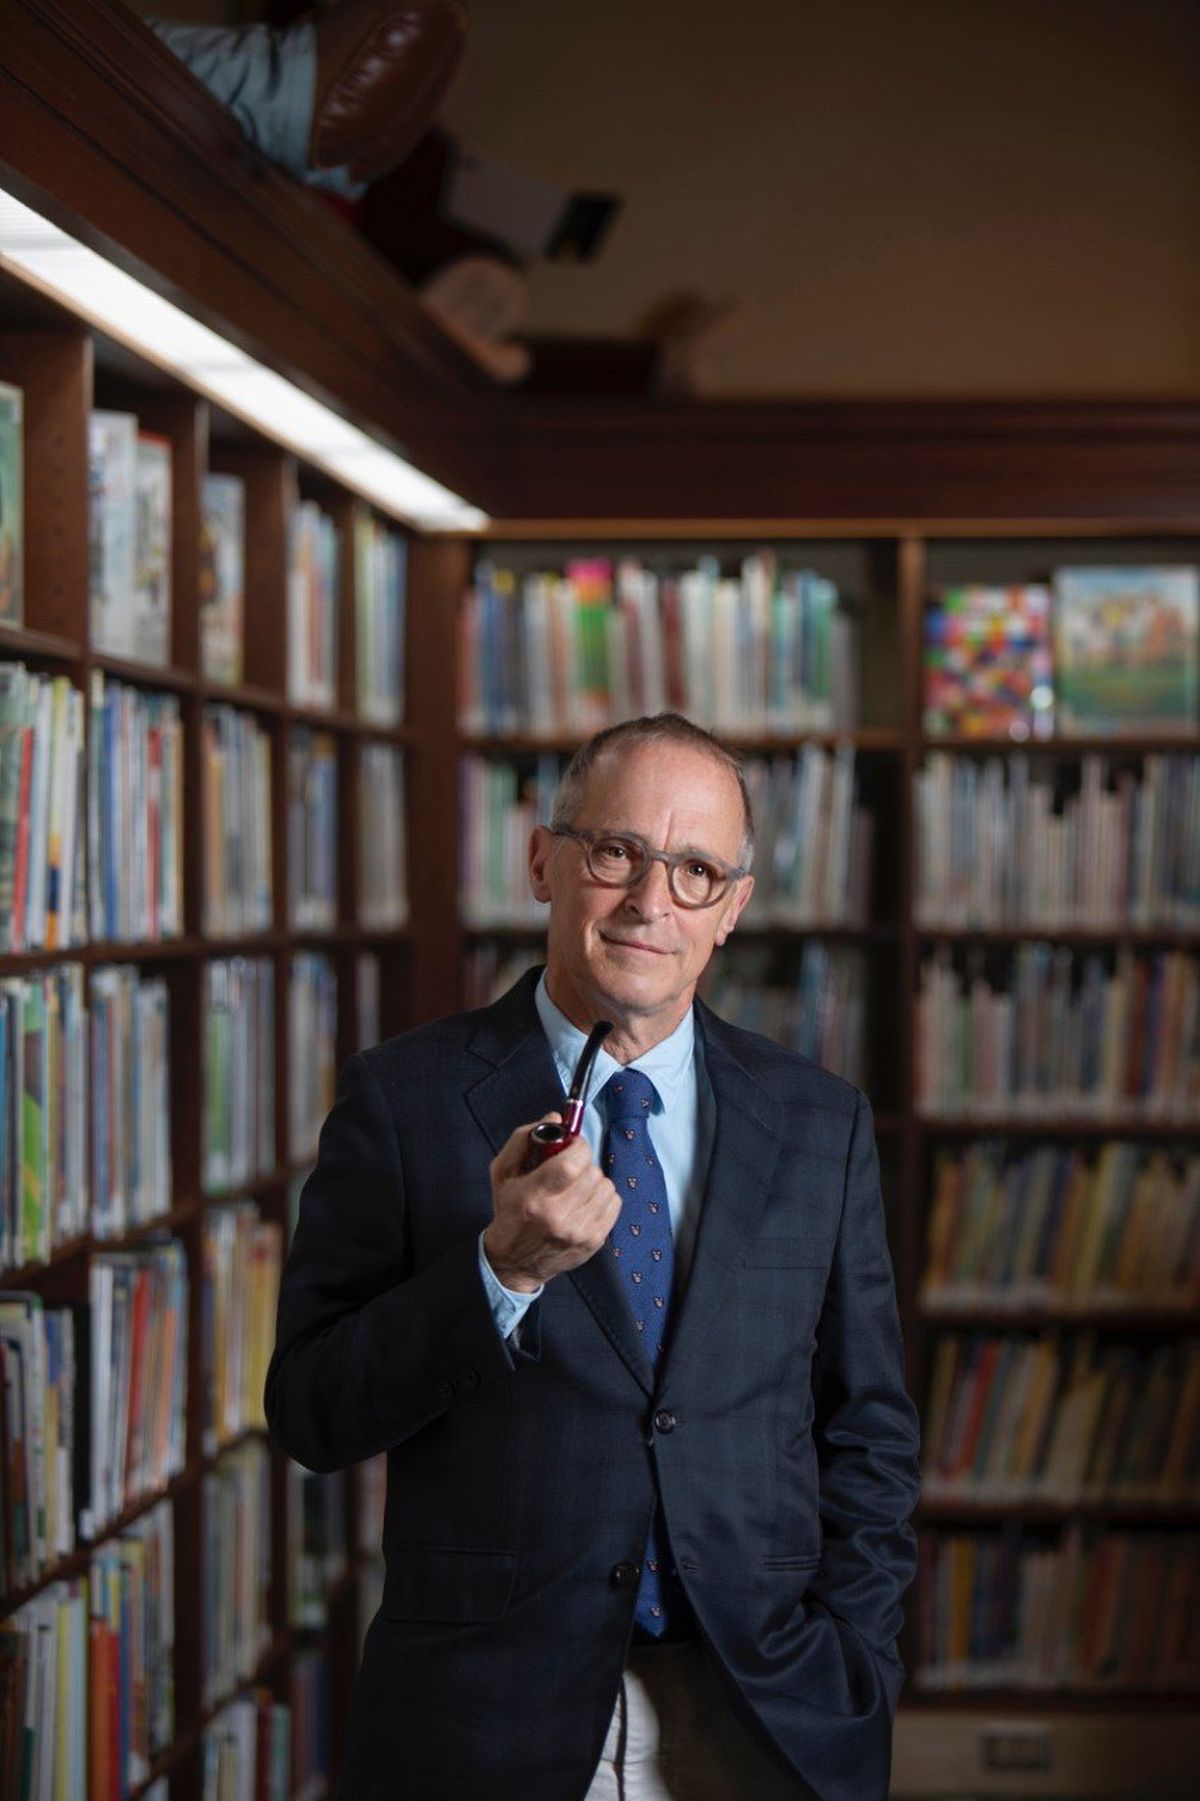 Author David Sedaris will return to Spokane to read from his latest book, “Happy-Go-Lucky,” on Saturday night at the Bing Crosby Theater.  (Anne Fishbein)